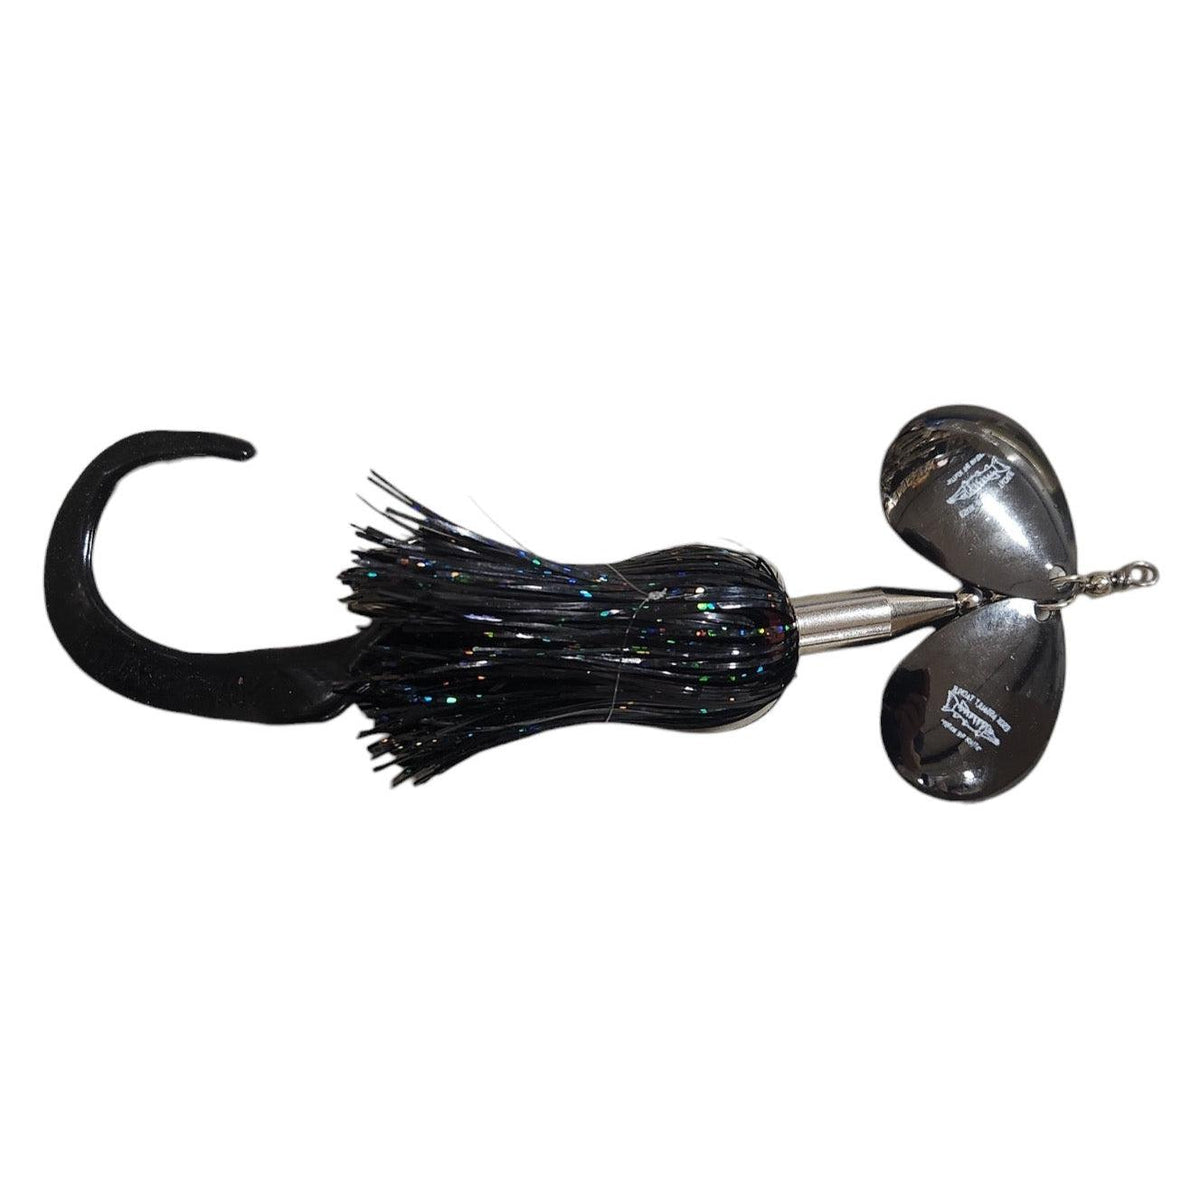 View of Bucktails Esox Assault Double 6 Bucktail Smoke available at EZOKO Pike and Musky Shop